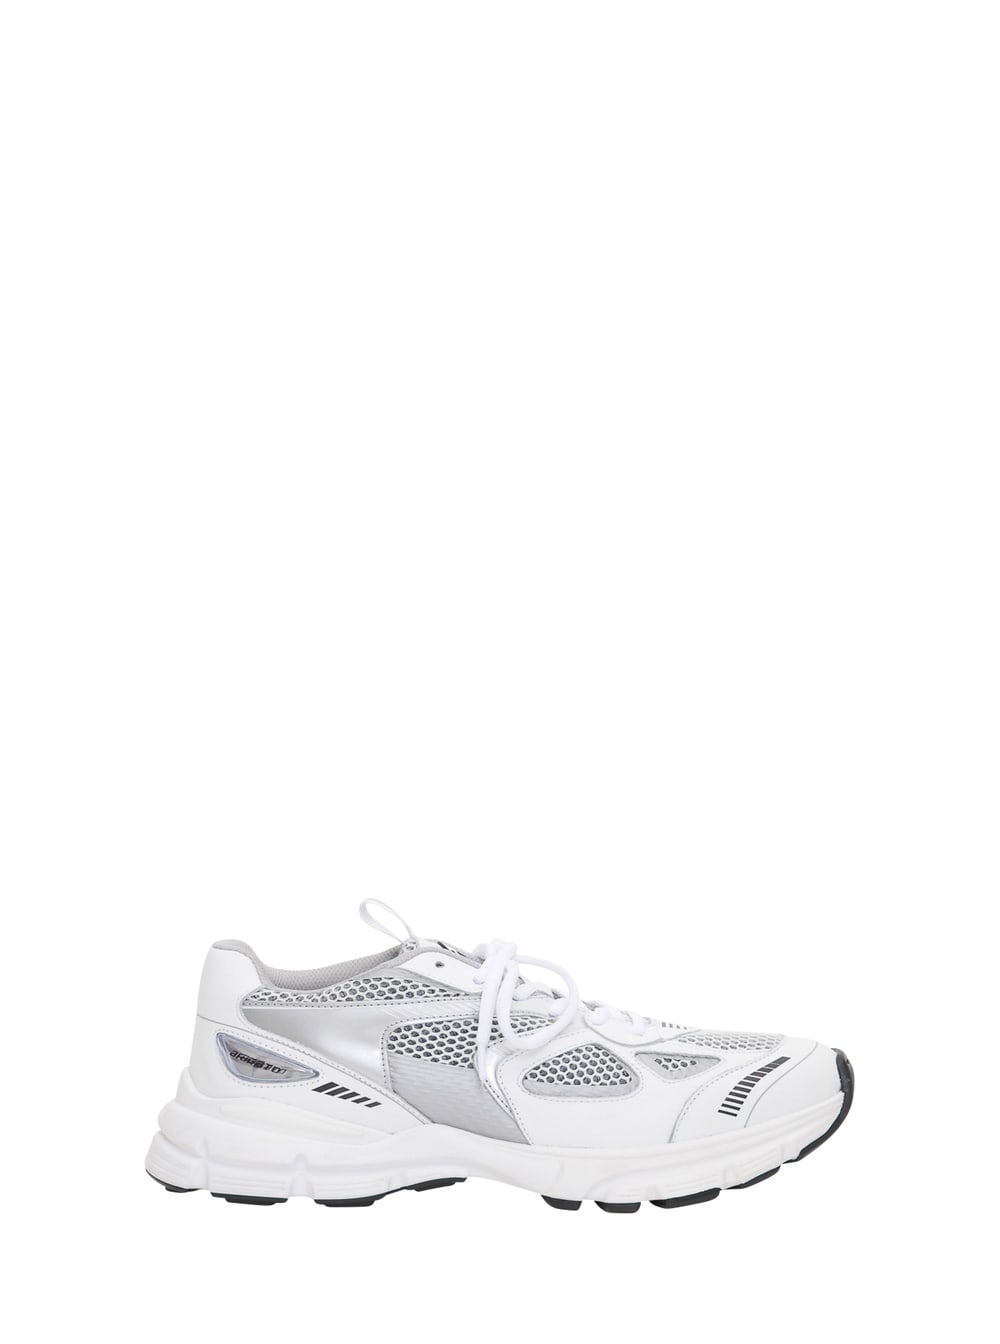 Axel Arigato Marathon Runner Silver And White Sneakers Wth Logo In Leather Blend Man